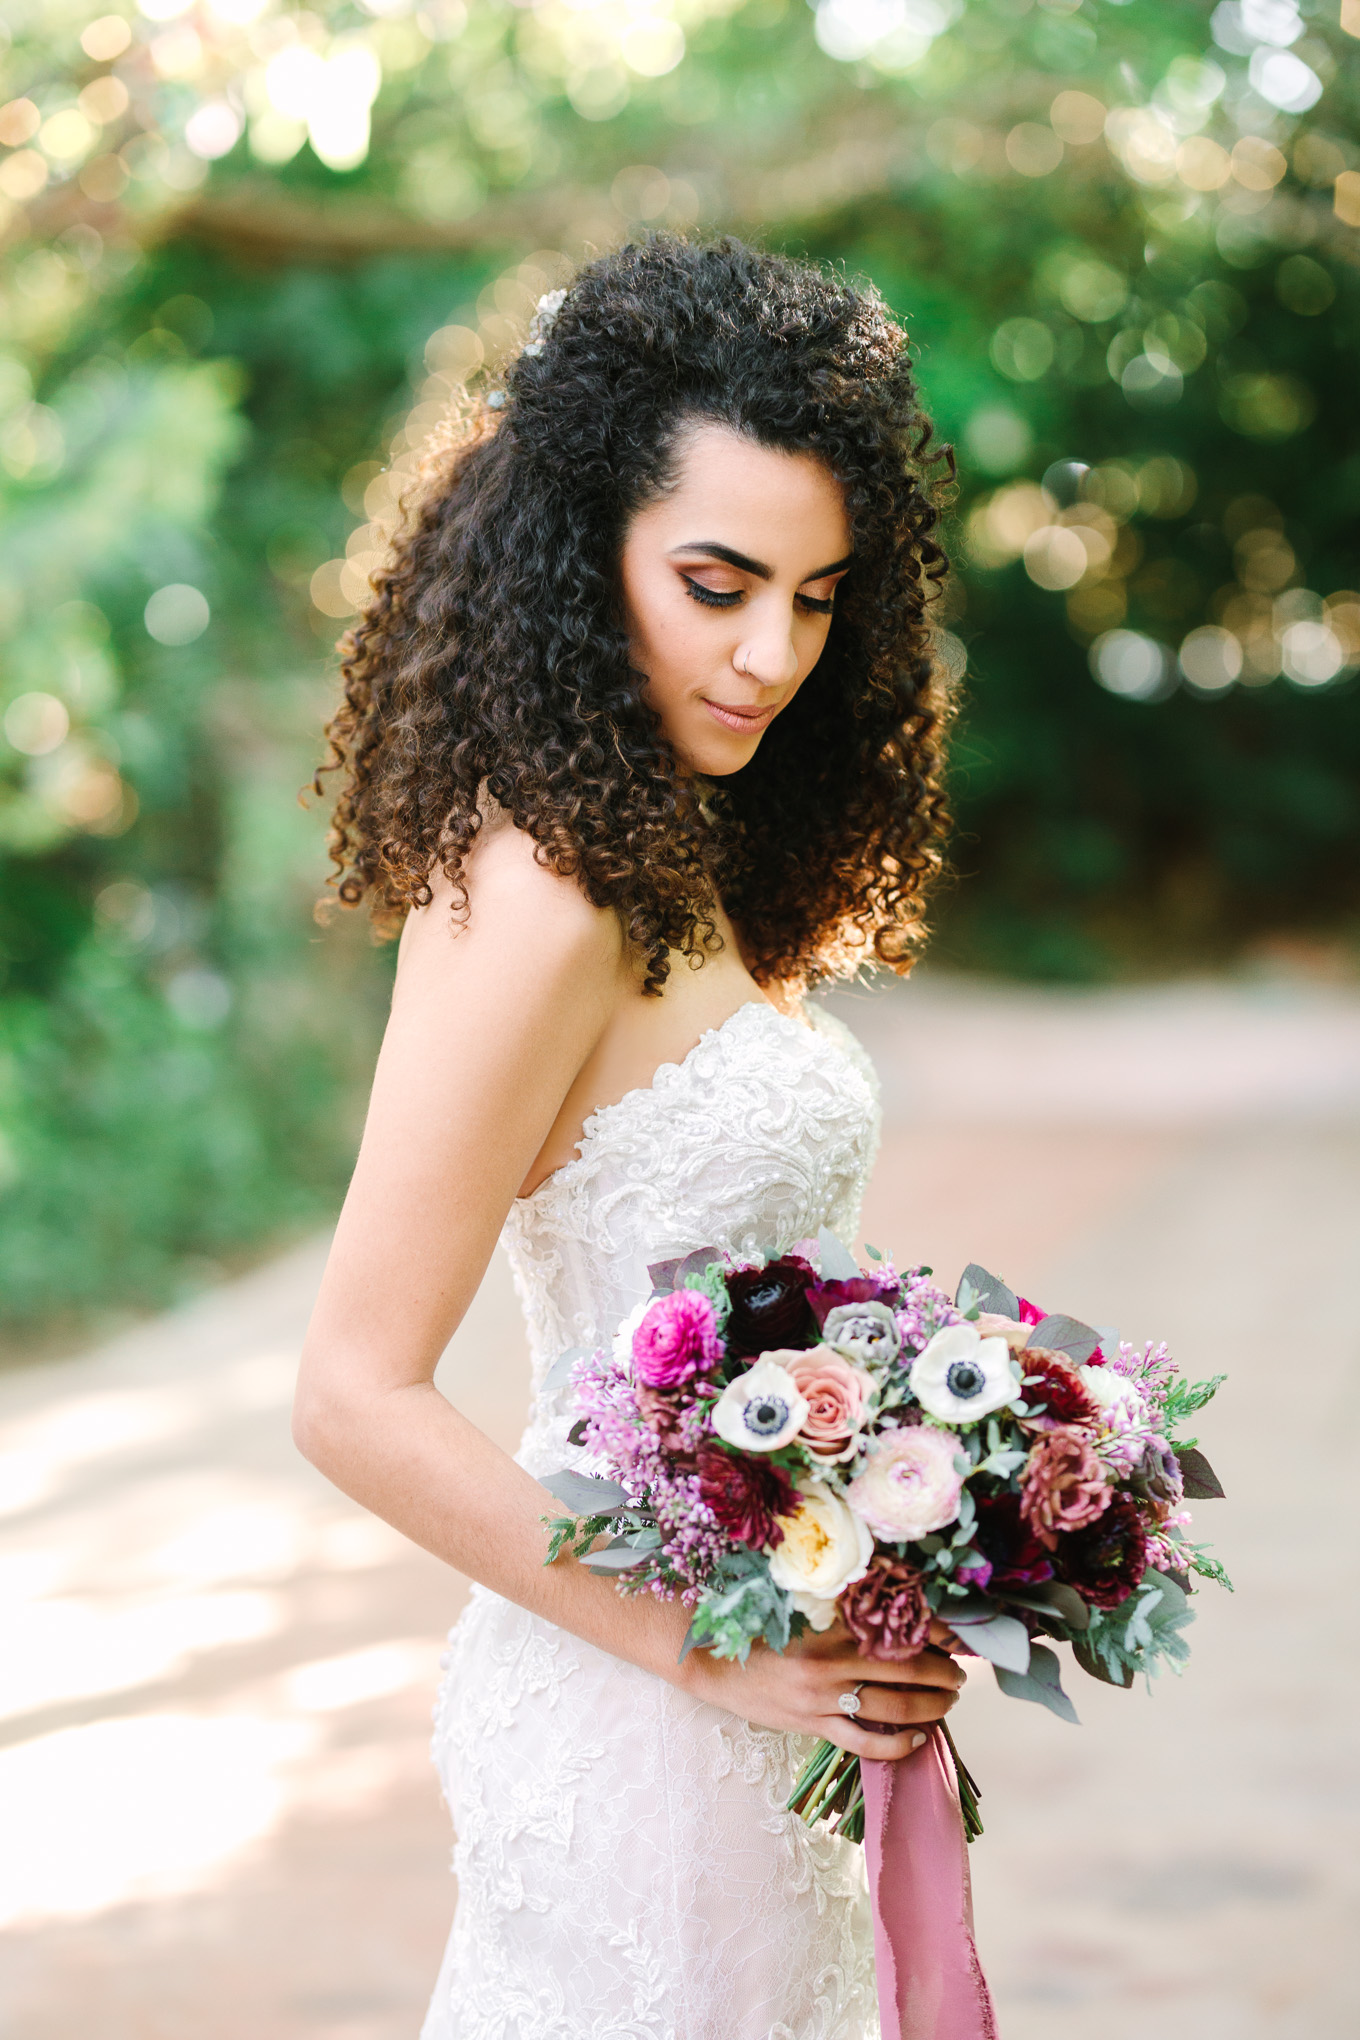 Bride with lavender and mauve wedding bouquet at Eden Gardens wedding | Best Southern California Garden Wedding Venues | Colorful and elevated wedding photography for fun-loving couples | #gardenvenue #weddingvenue #socalweddingvenue #bouquetideas #uniquebouquet   Source: Mary Costa Photography | Los Angeles 